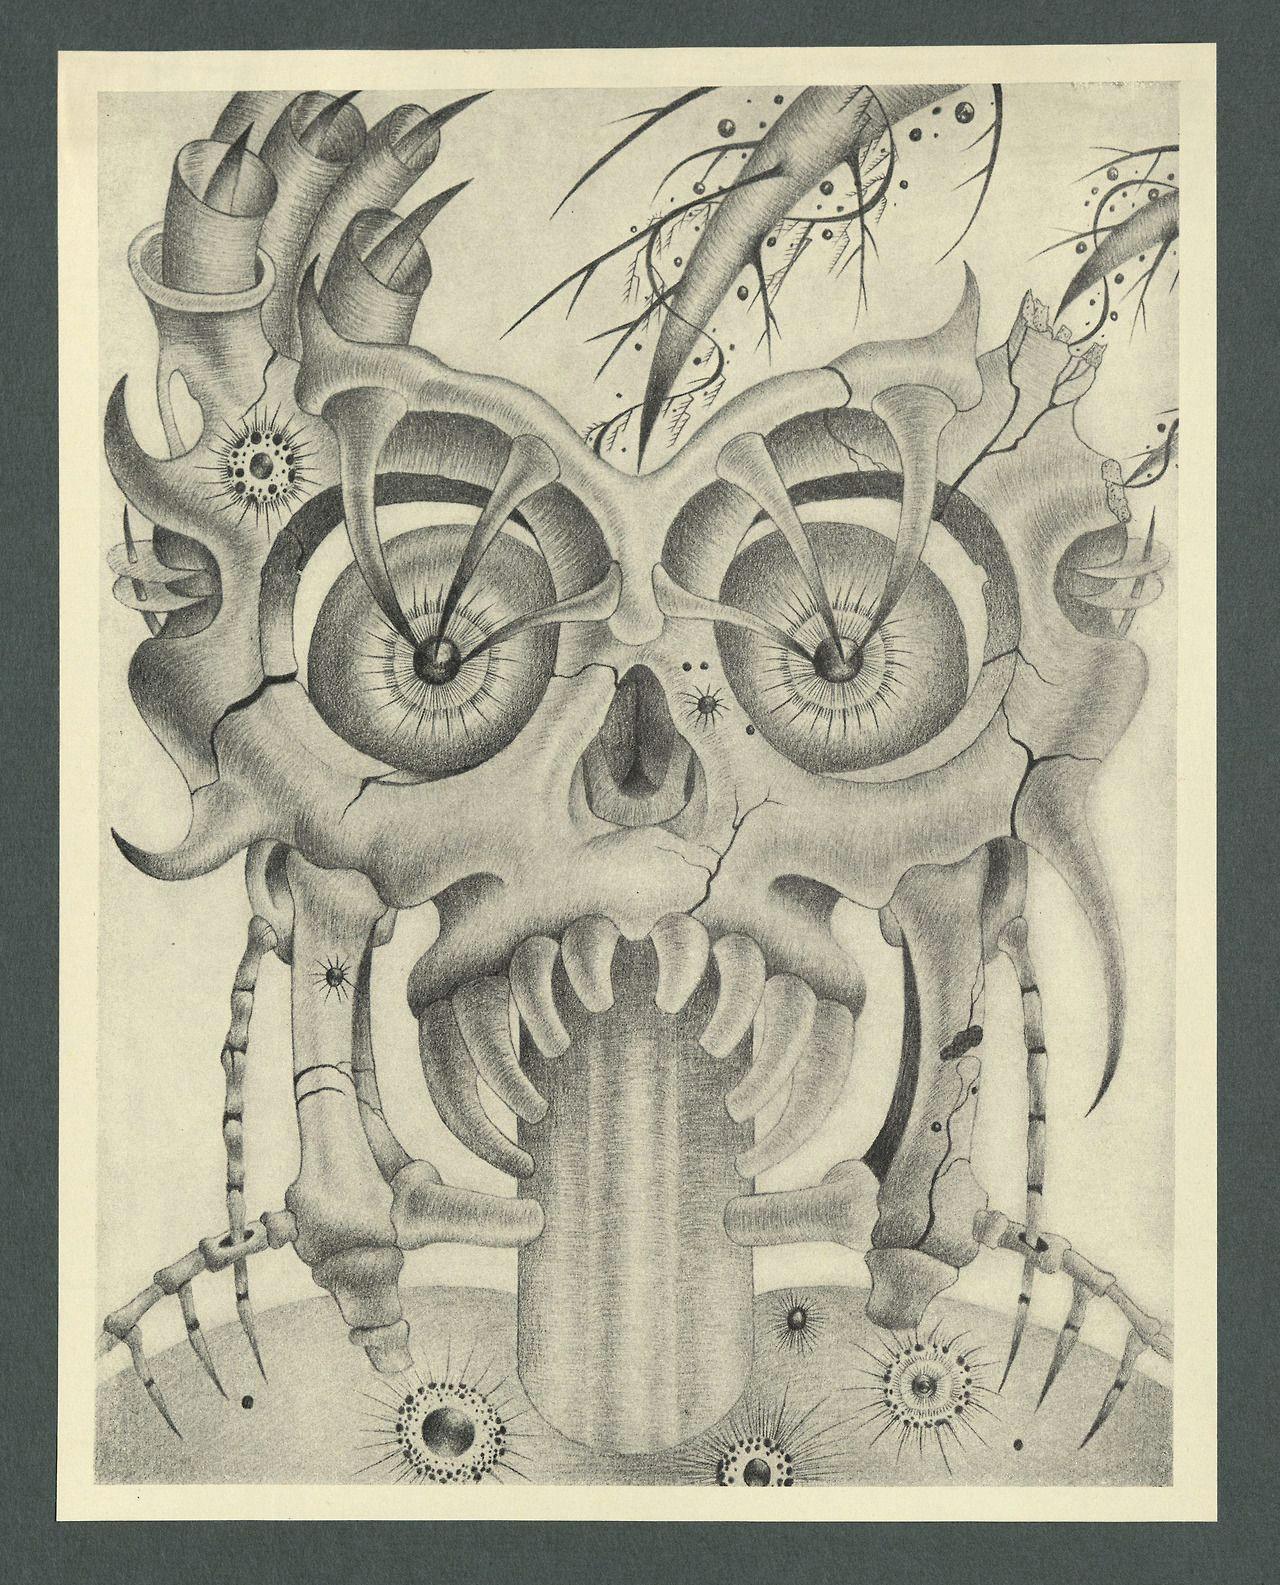 Skull Drawing From the Side Homicidal Frenzy From John Franklin Hawkins Portfolio Of Drawings